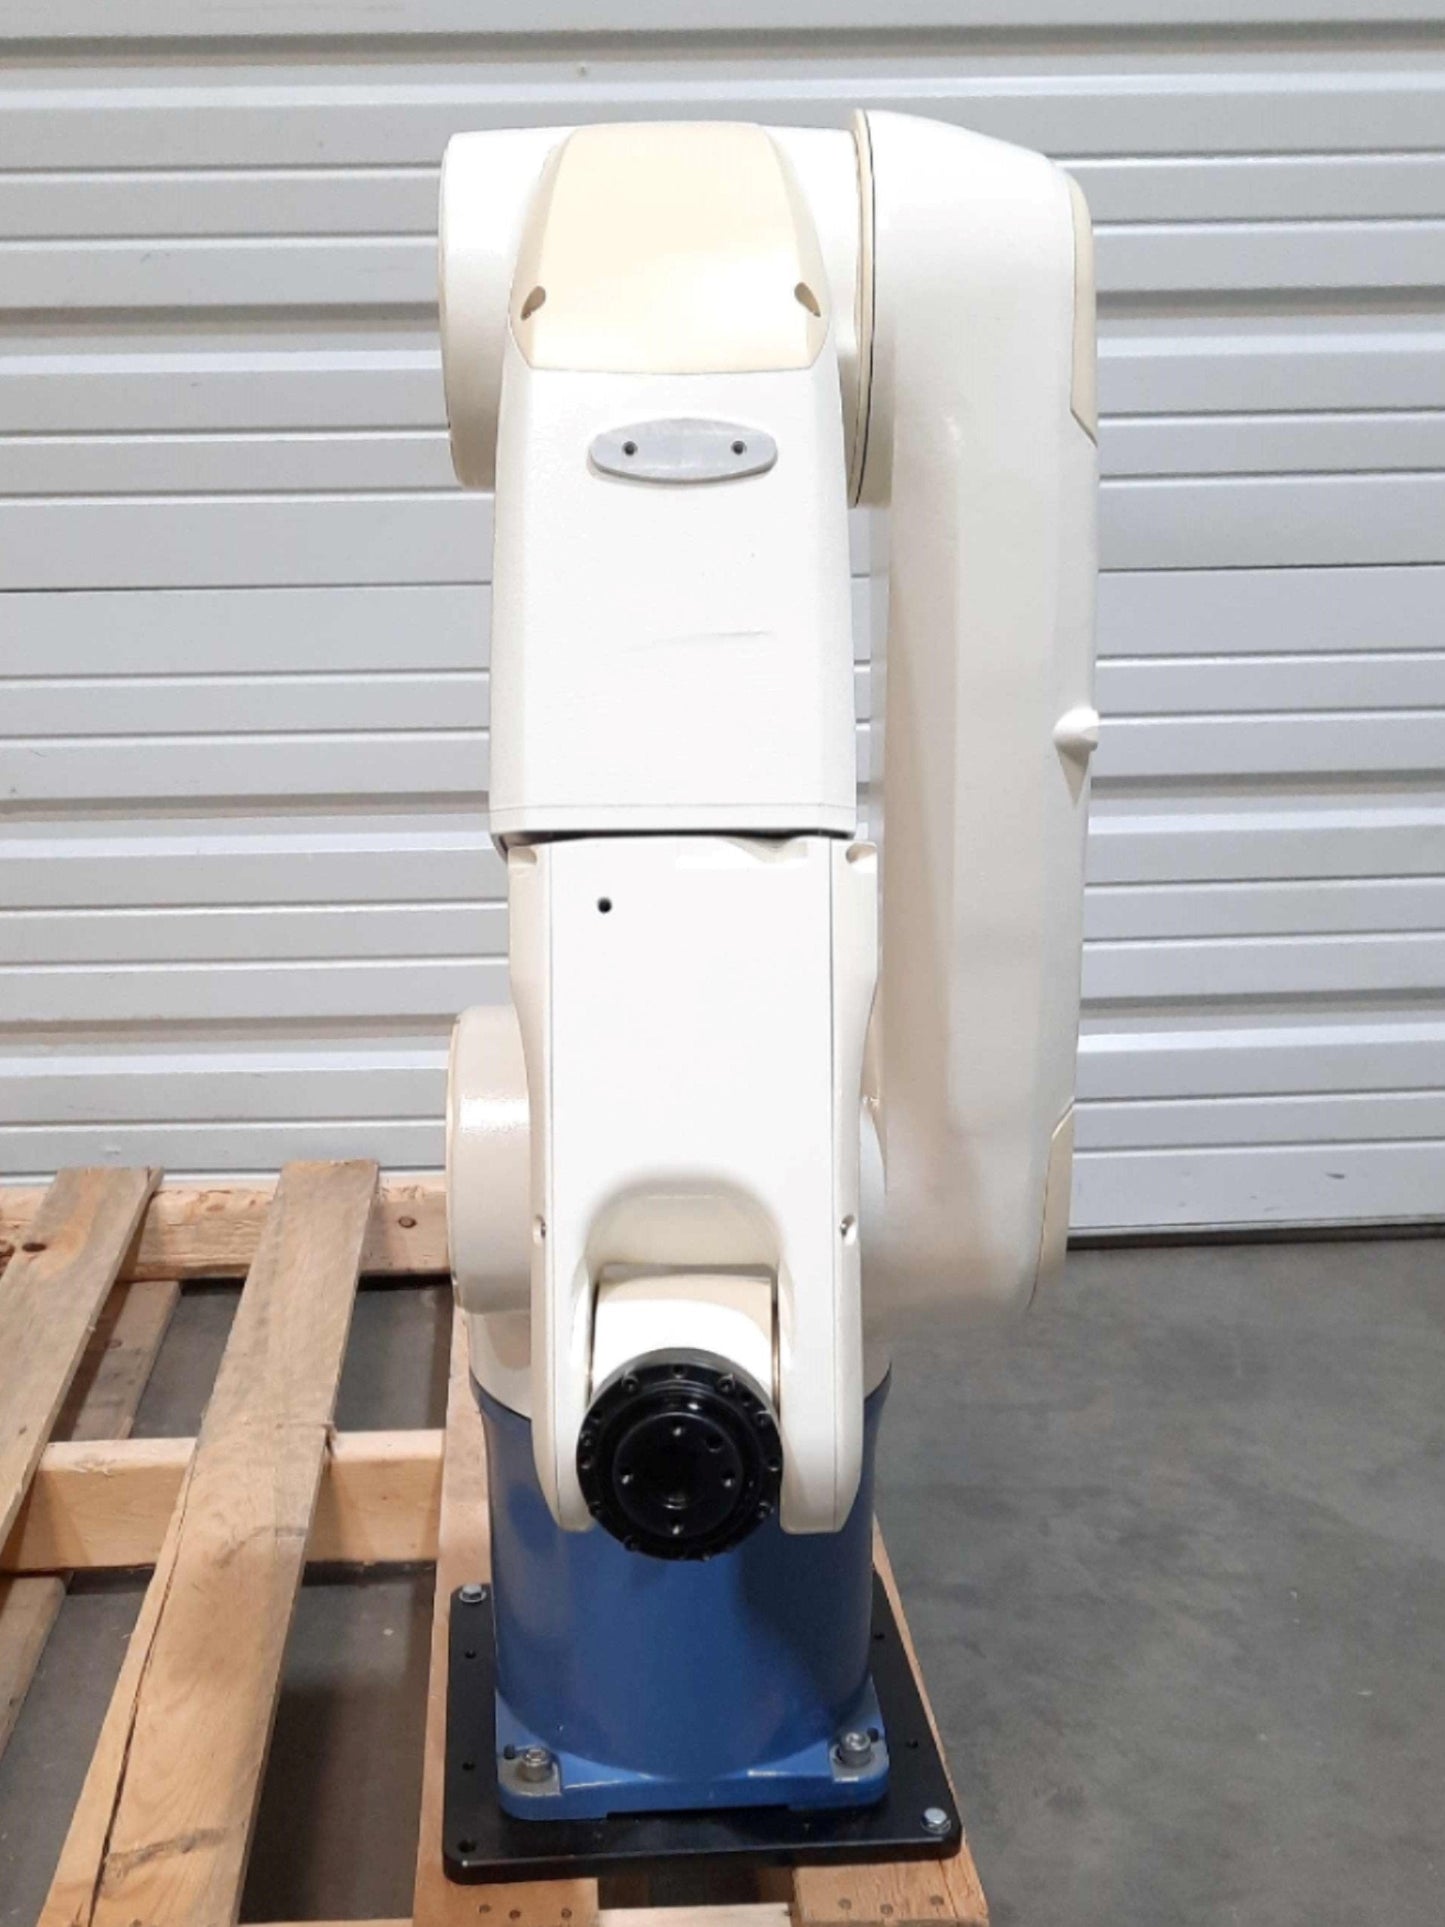 Used DENSO VS-6577E & RC5 Six Axis Robot System 7kg Load 770mm Reach 7600mm/s 230VAC